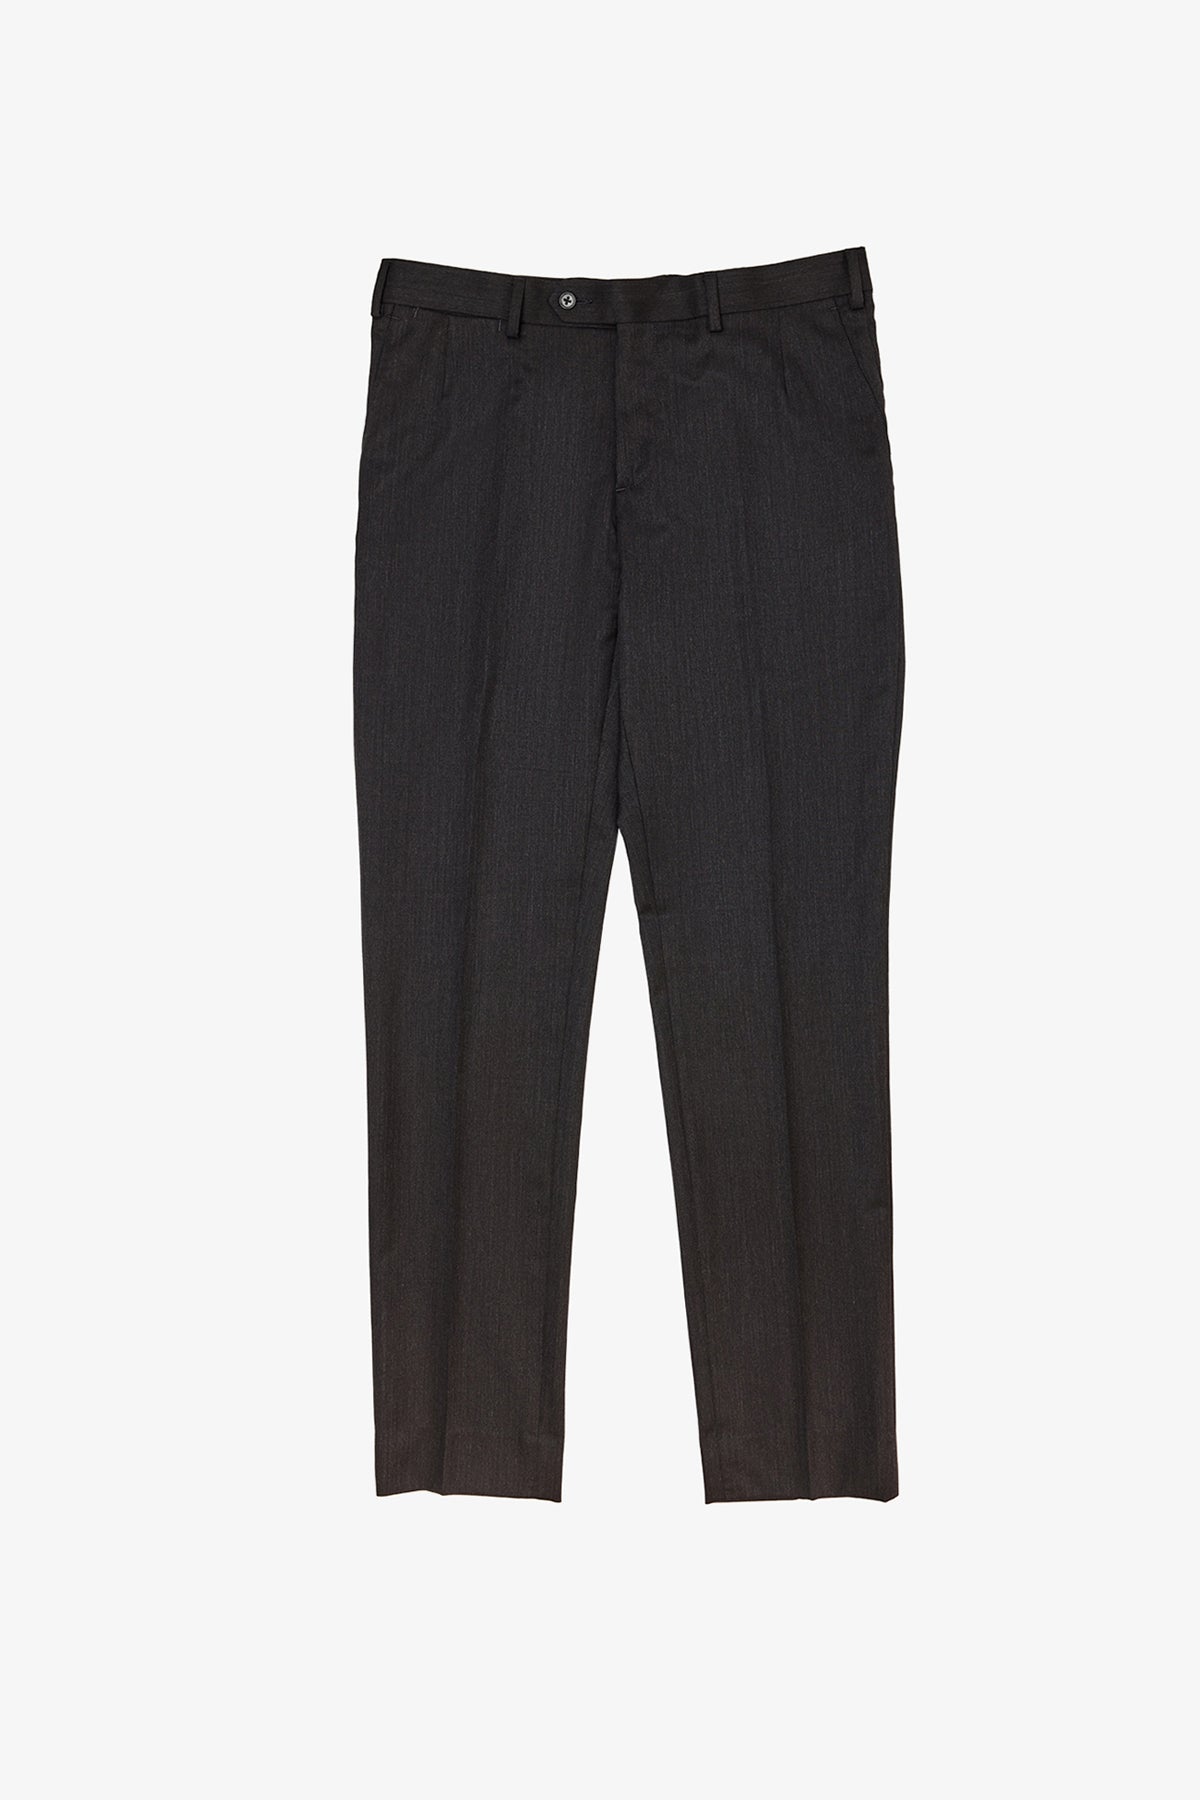 Tives - Charcoal Trouser